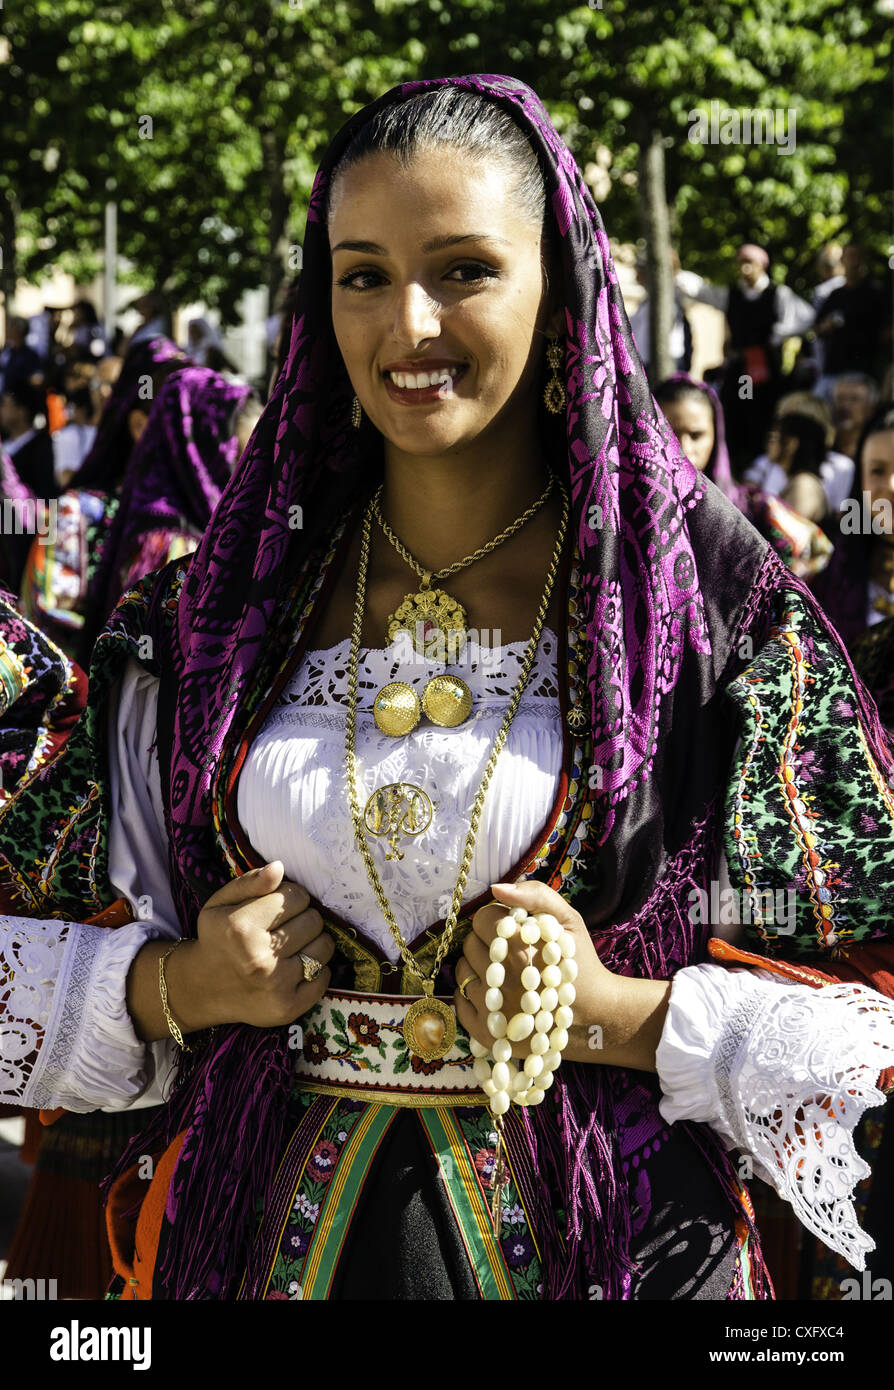 Woman wearing a traditional Sardinian costume at the religious feast Sagra  del Redentore Nuoro Sardinia Italy Stock Photo - Alamy